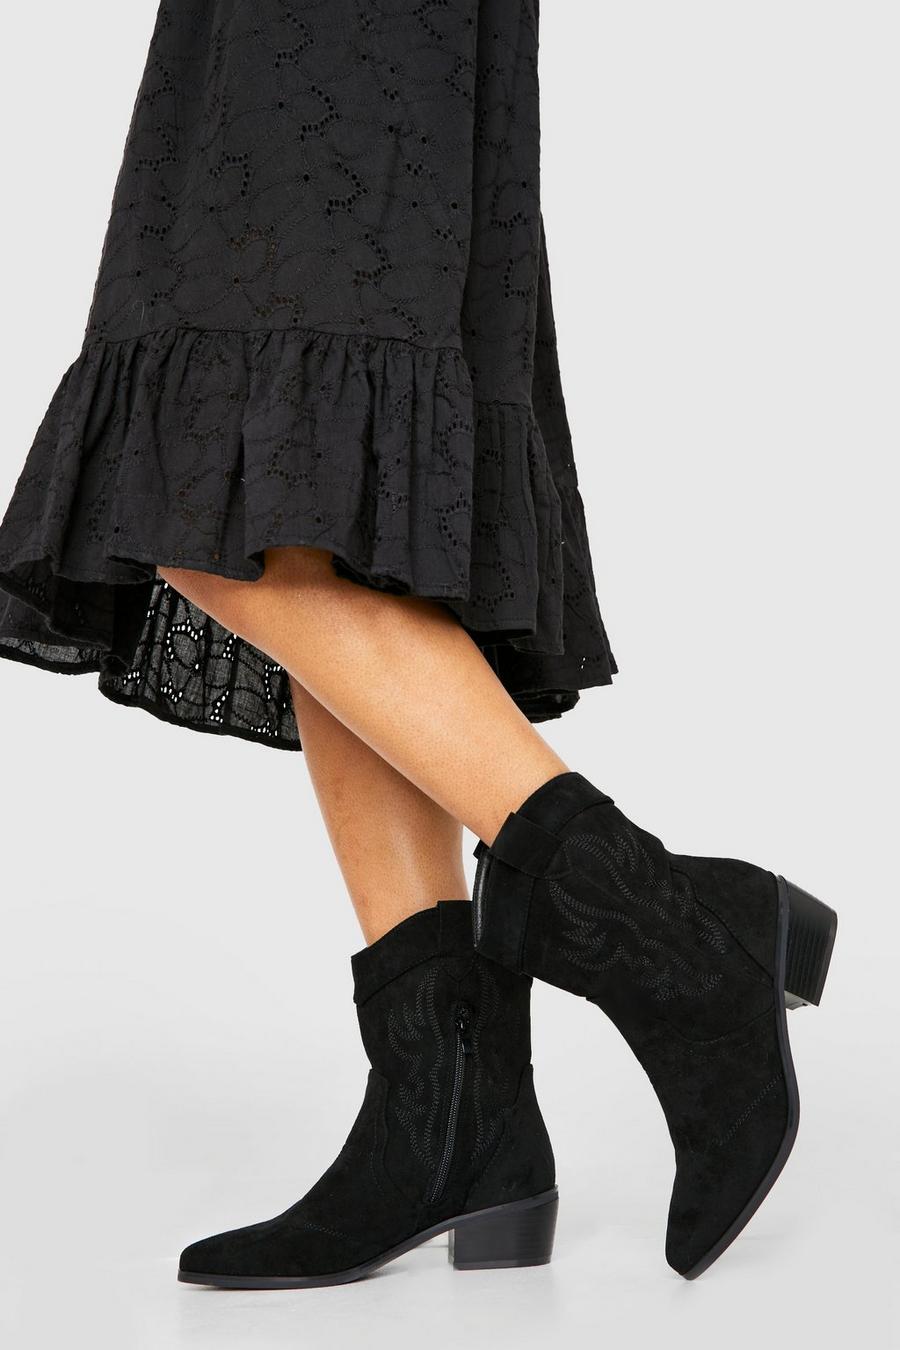 Black Embroidered Western Ankle Cowboy Boots